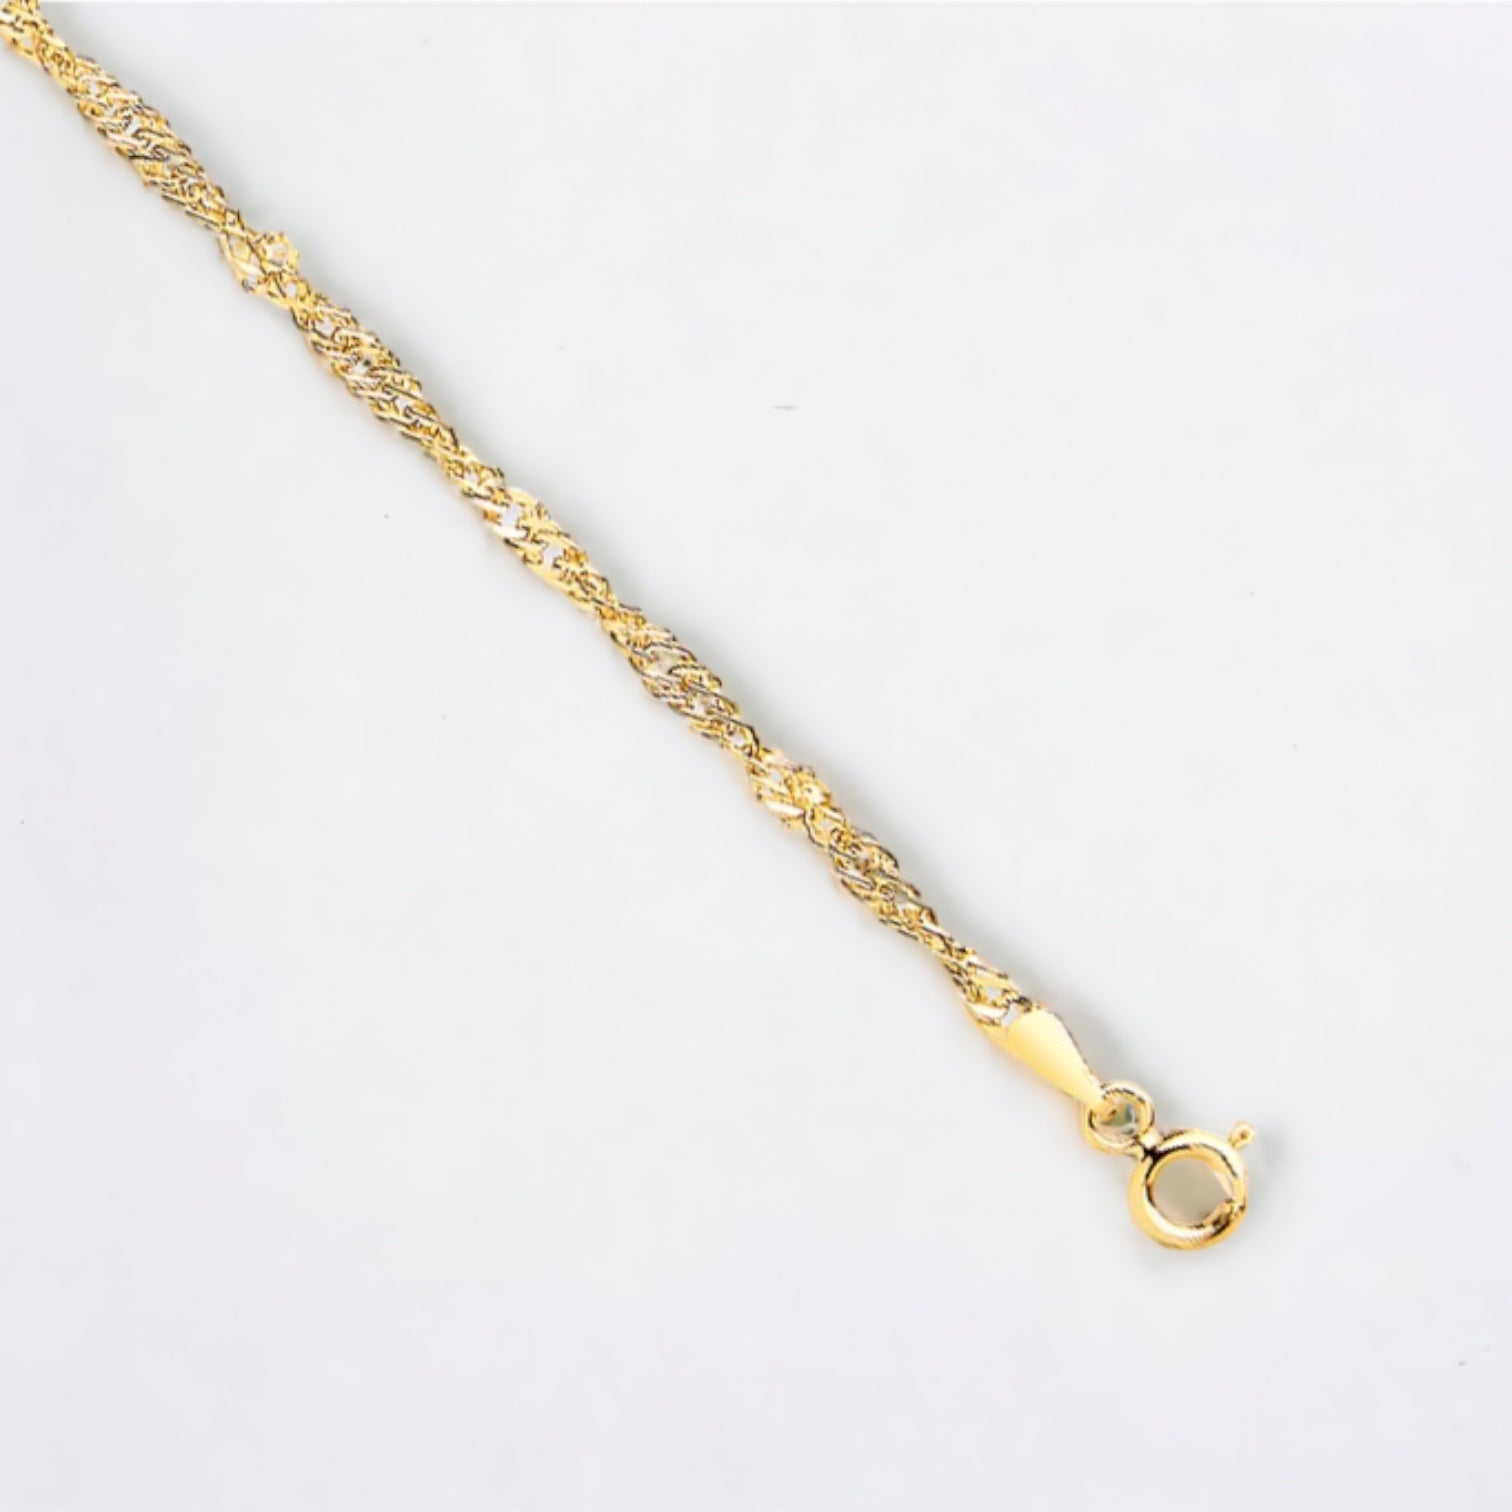 2.2mm 9ct solid Gold Singapore Chain | 16" - 20"